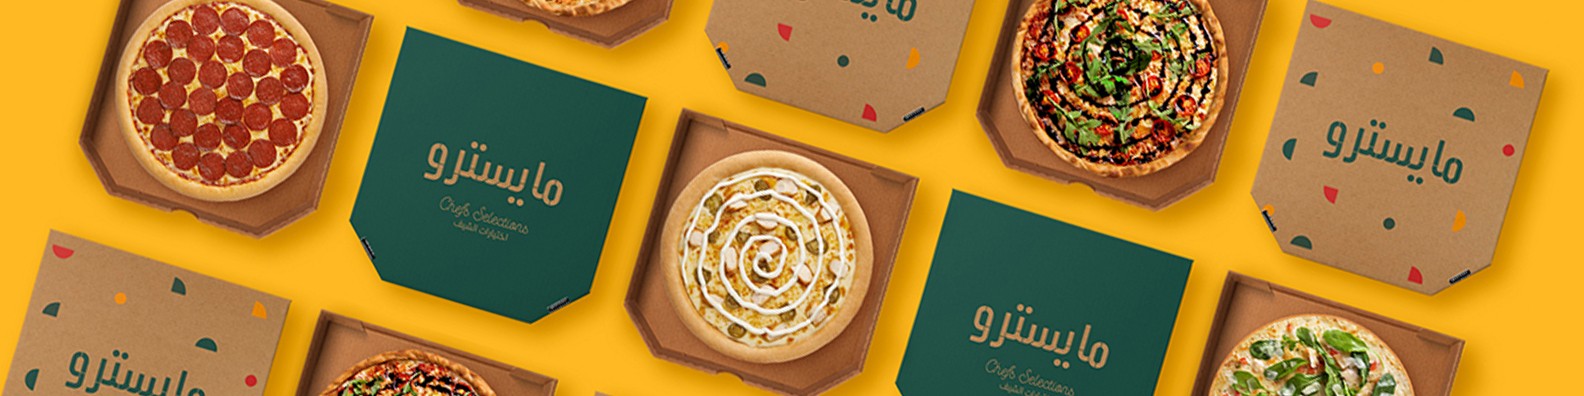 Maestro Pizza By Daily Food Co Linkedin